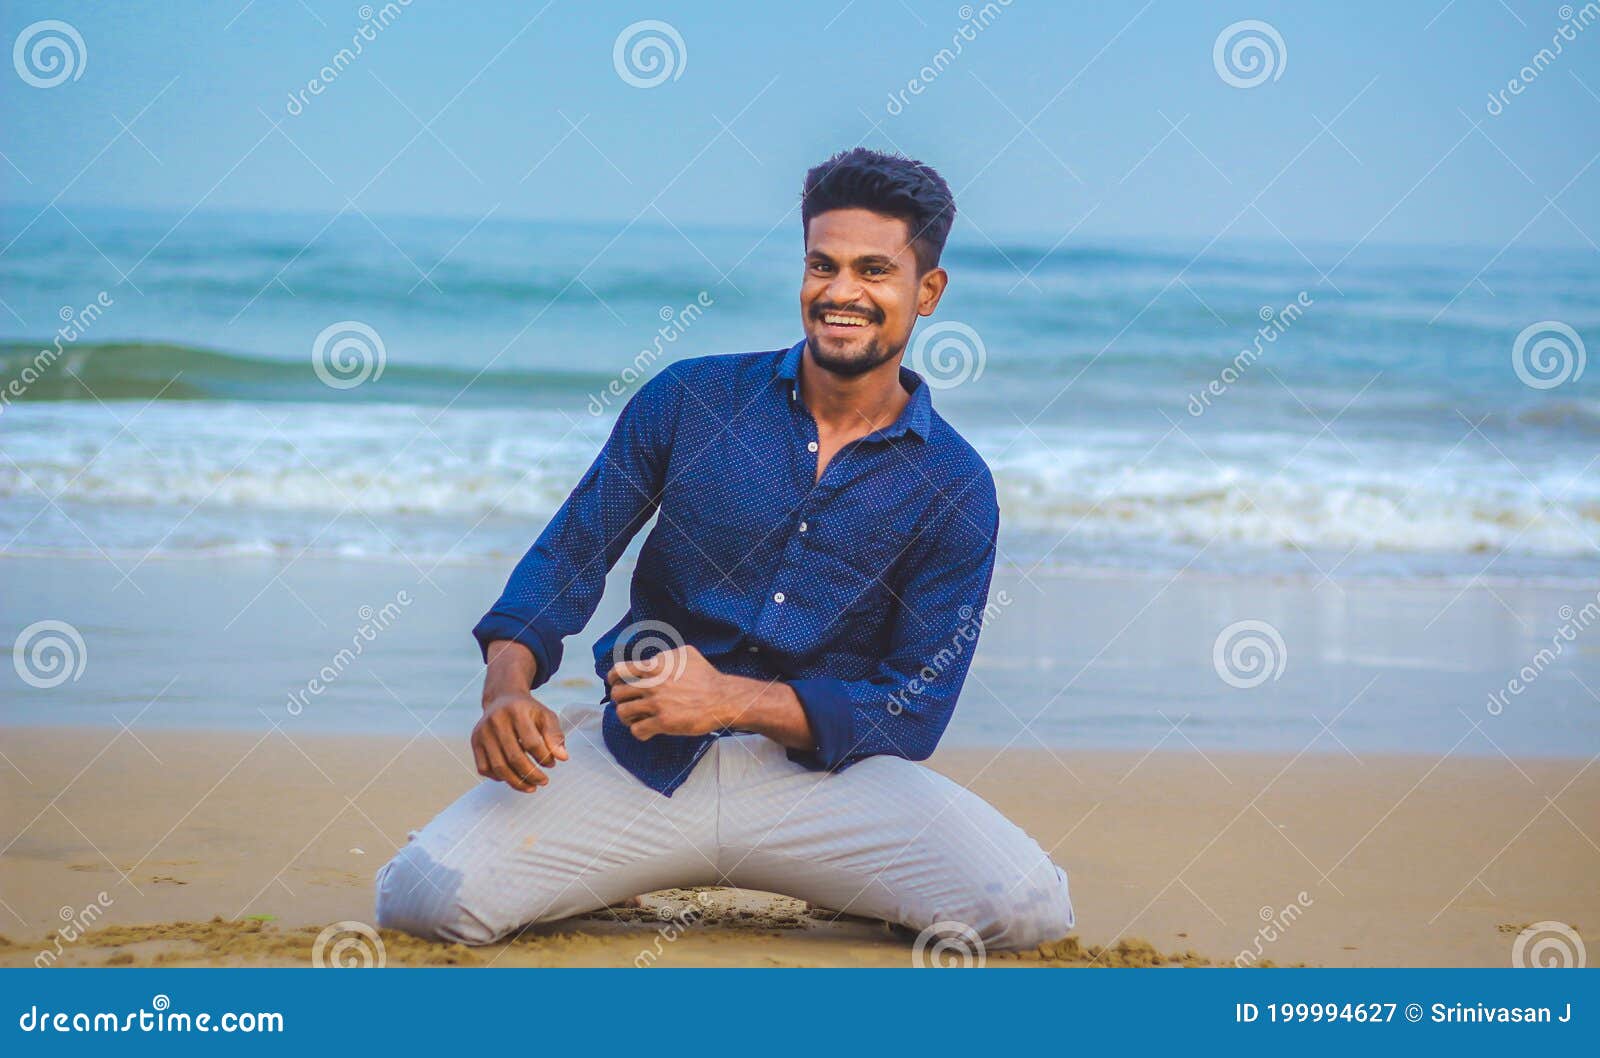 indian men model posing smiling beach sea view background handsome confident outdoor portrait young asian man 199994627